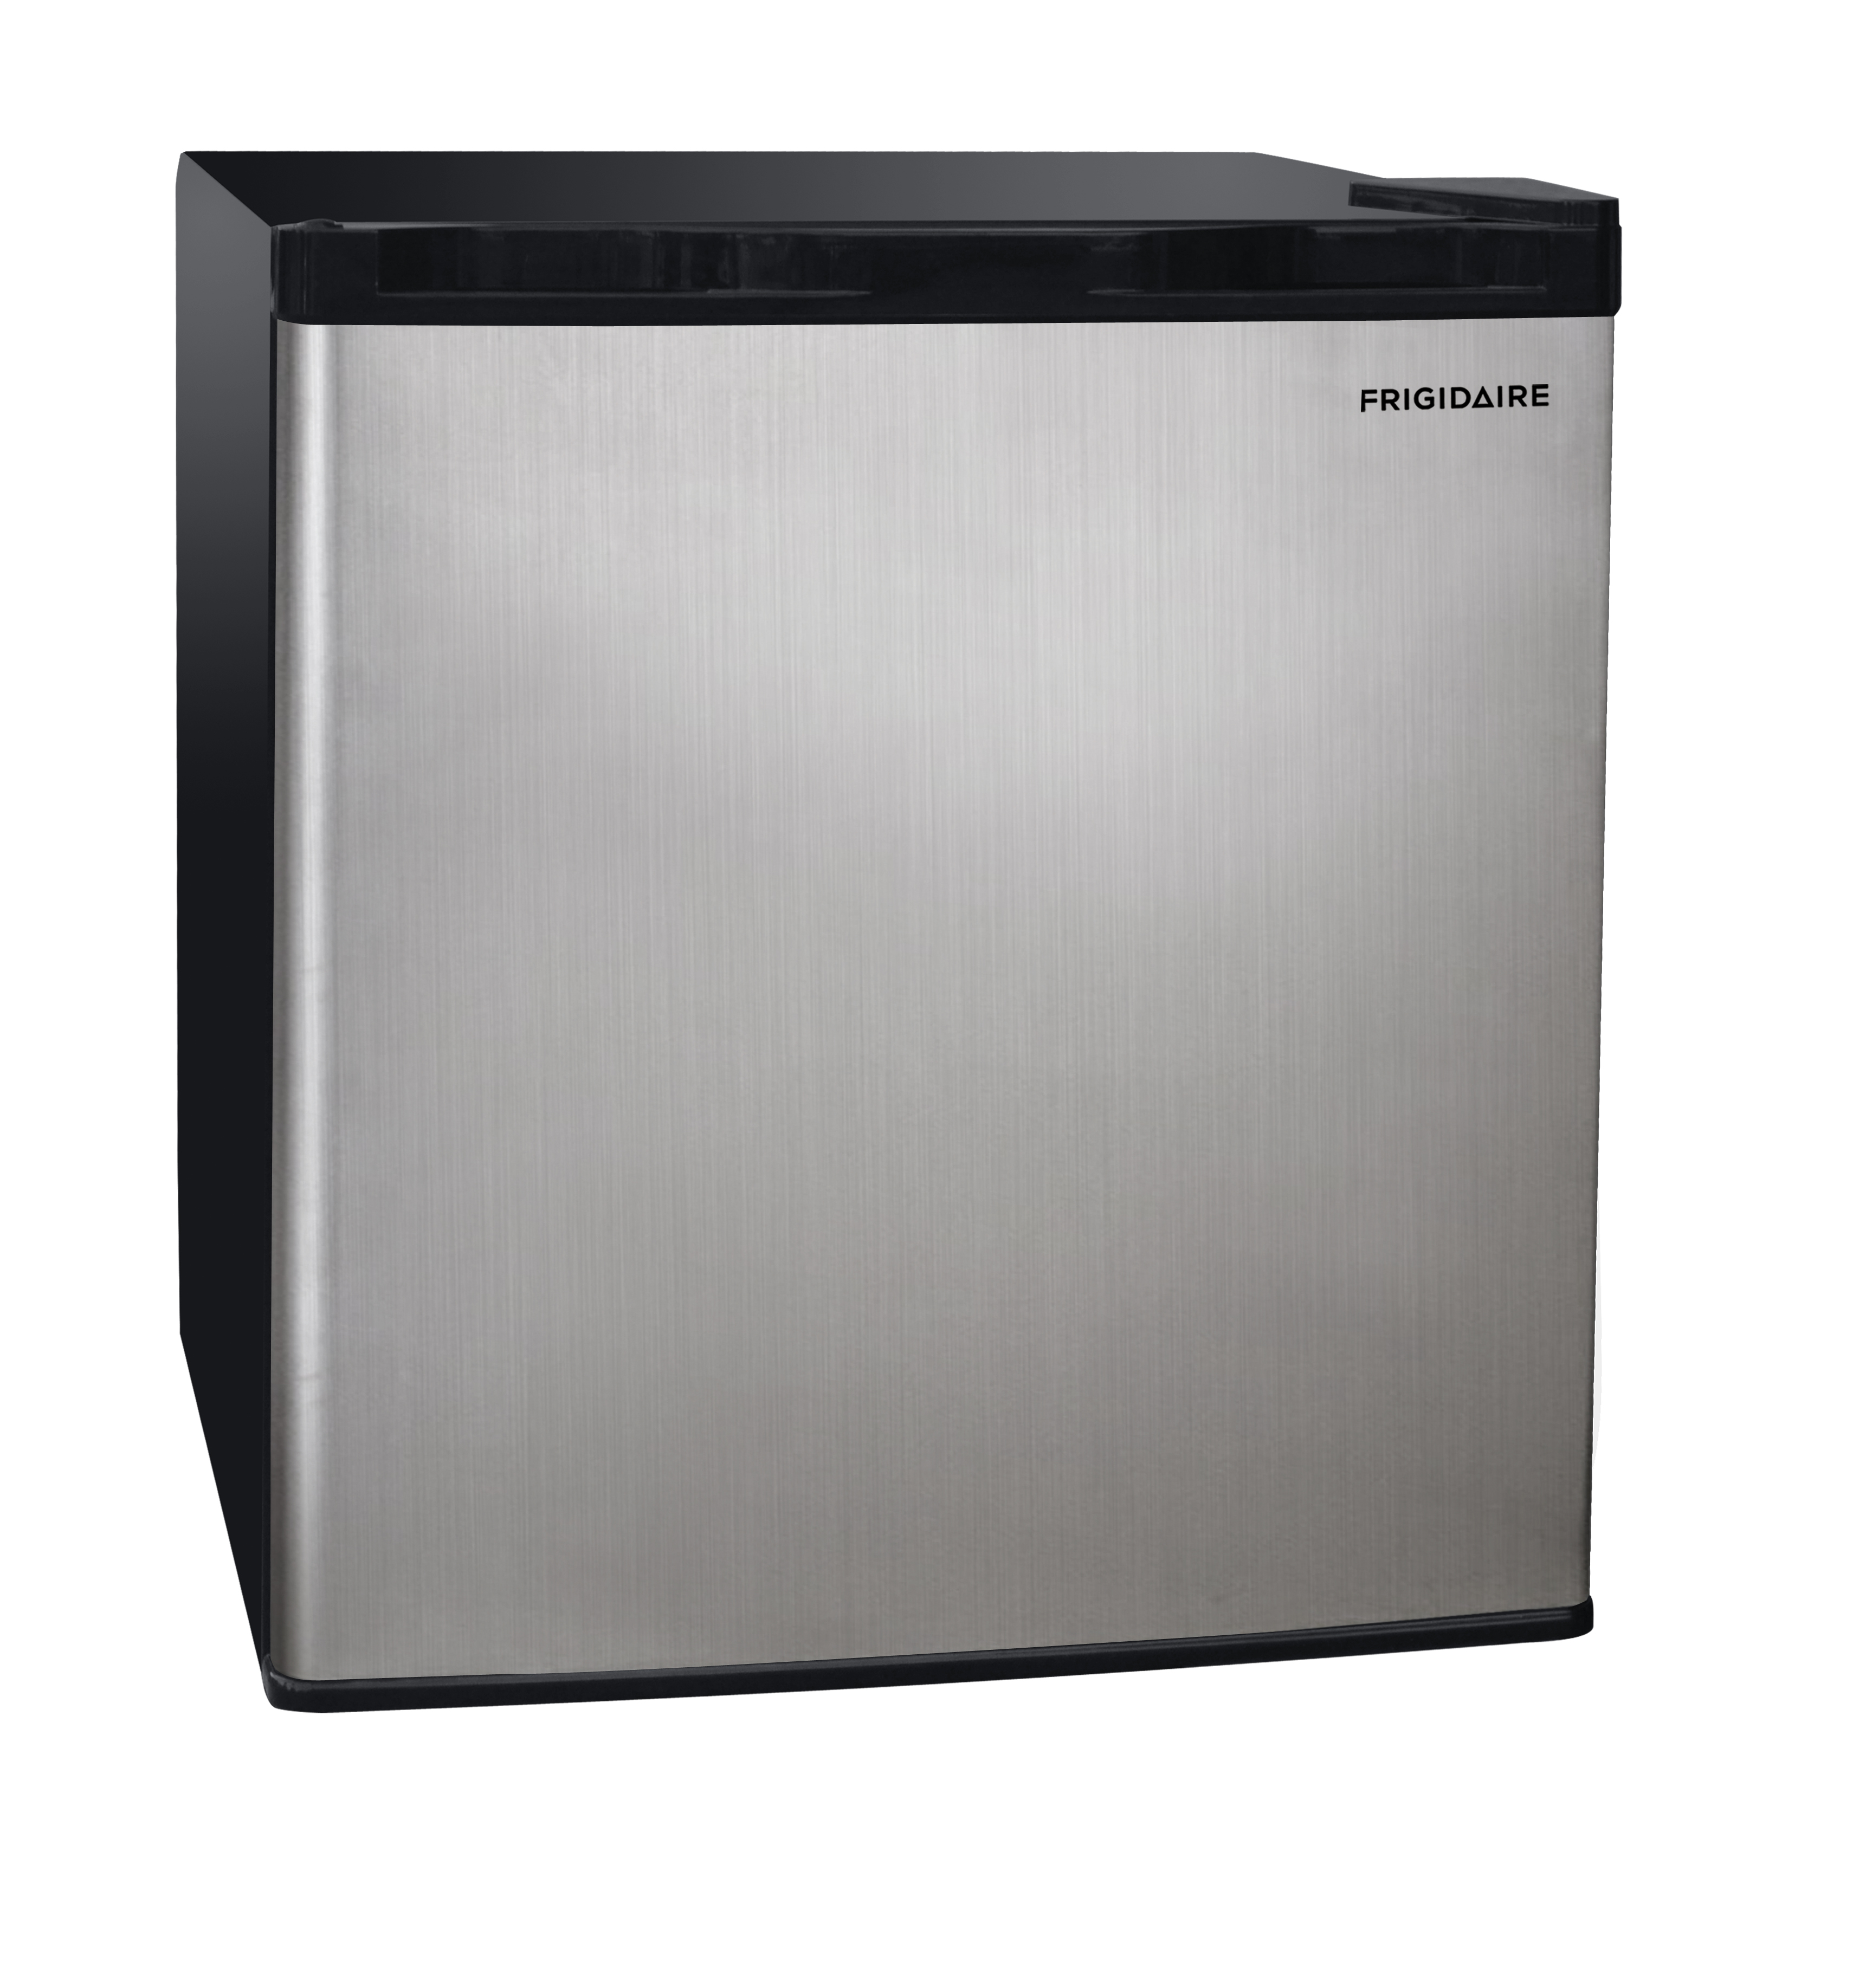 Frigidaire 1.6 Cu Ft Compact Refrigerator, Stainless Steel - image 4 of 6